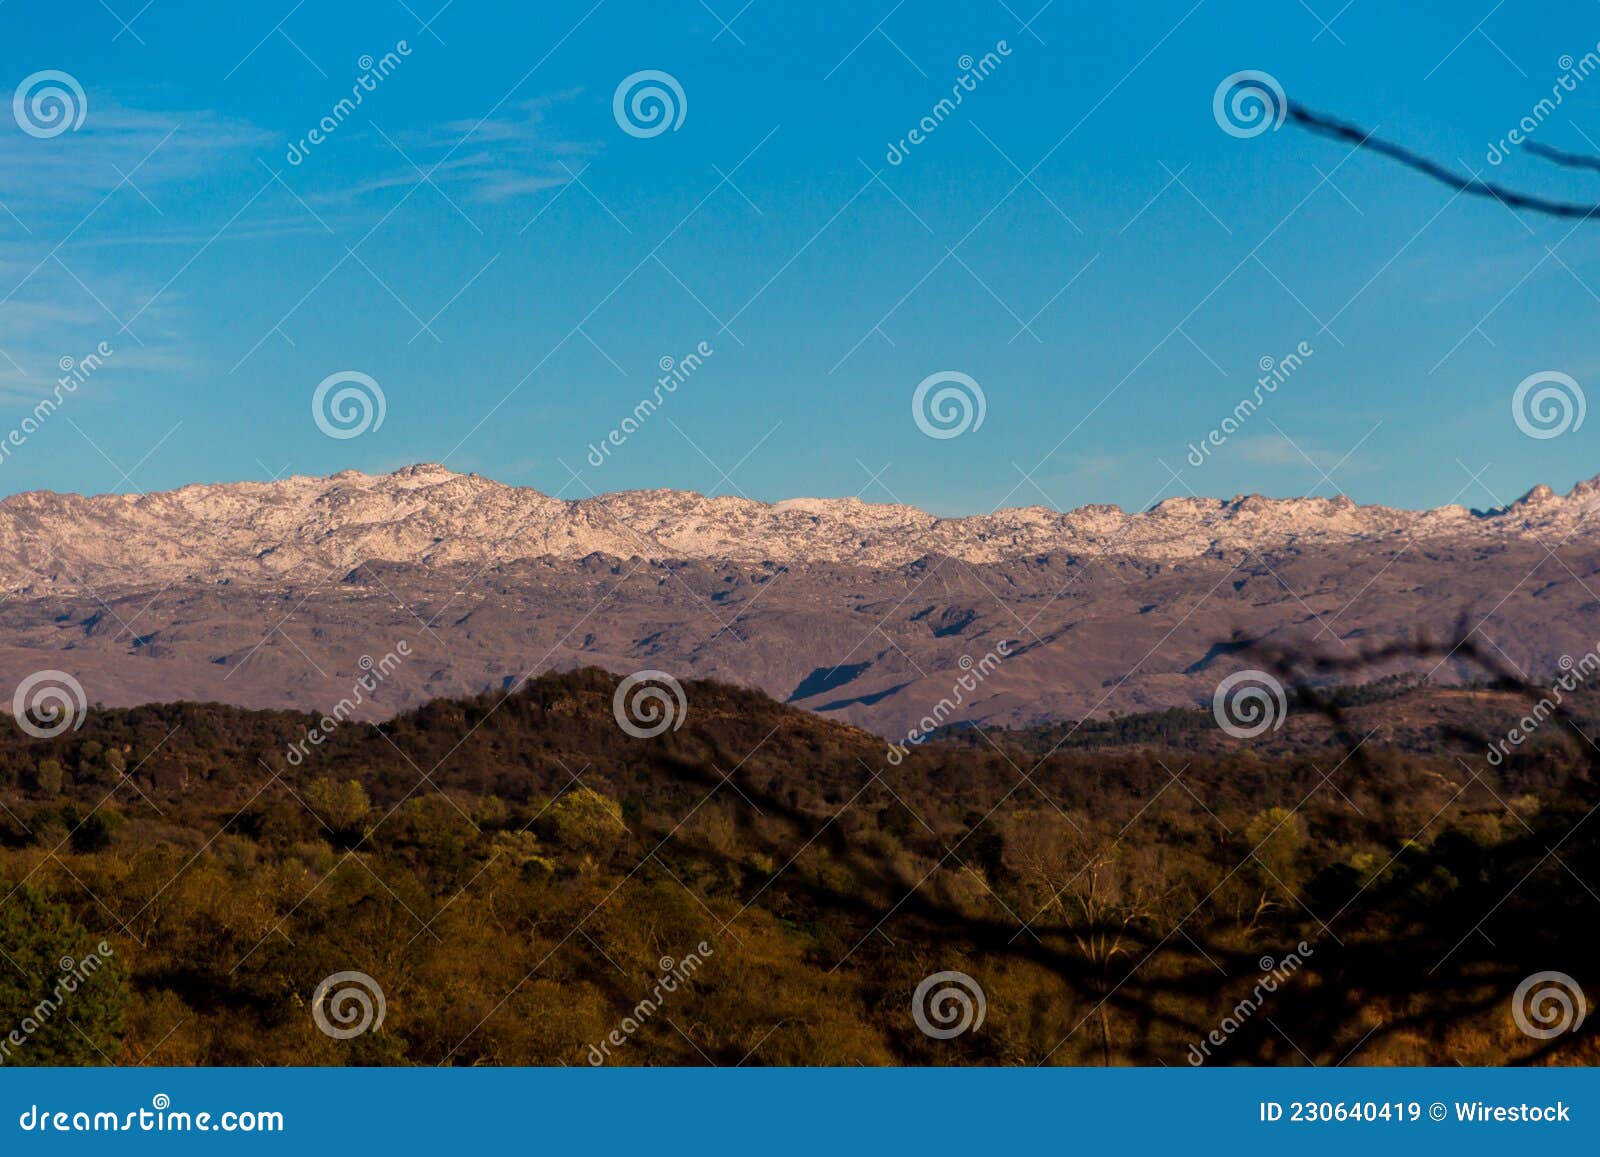 panoramic view of the snowy mountain ranges in the calamuchita valley, cordoba, argentina